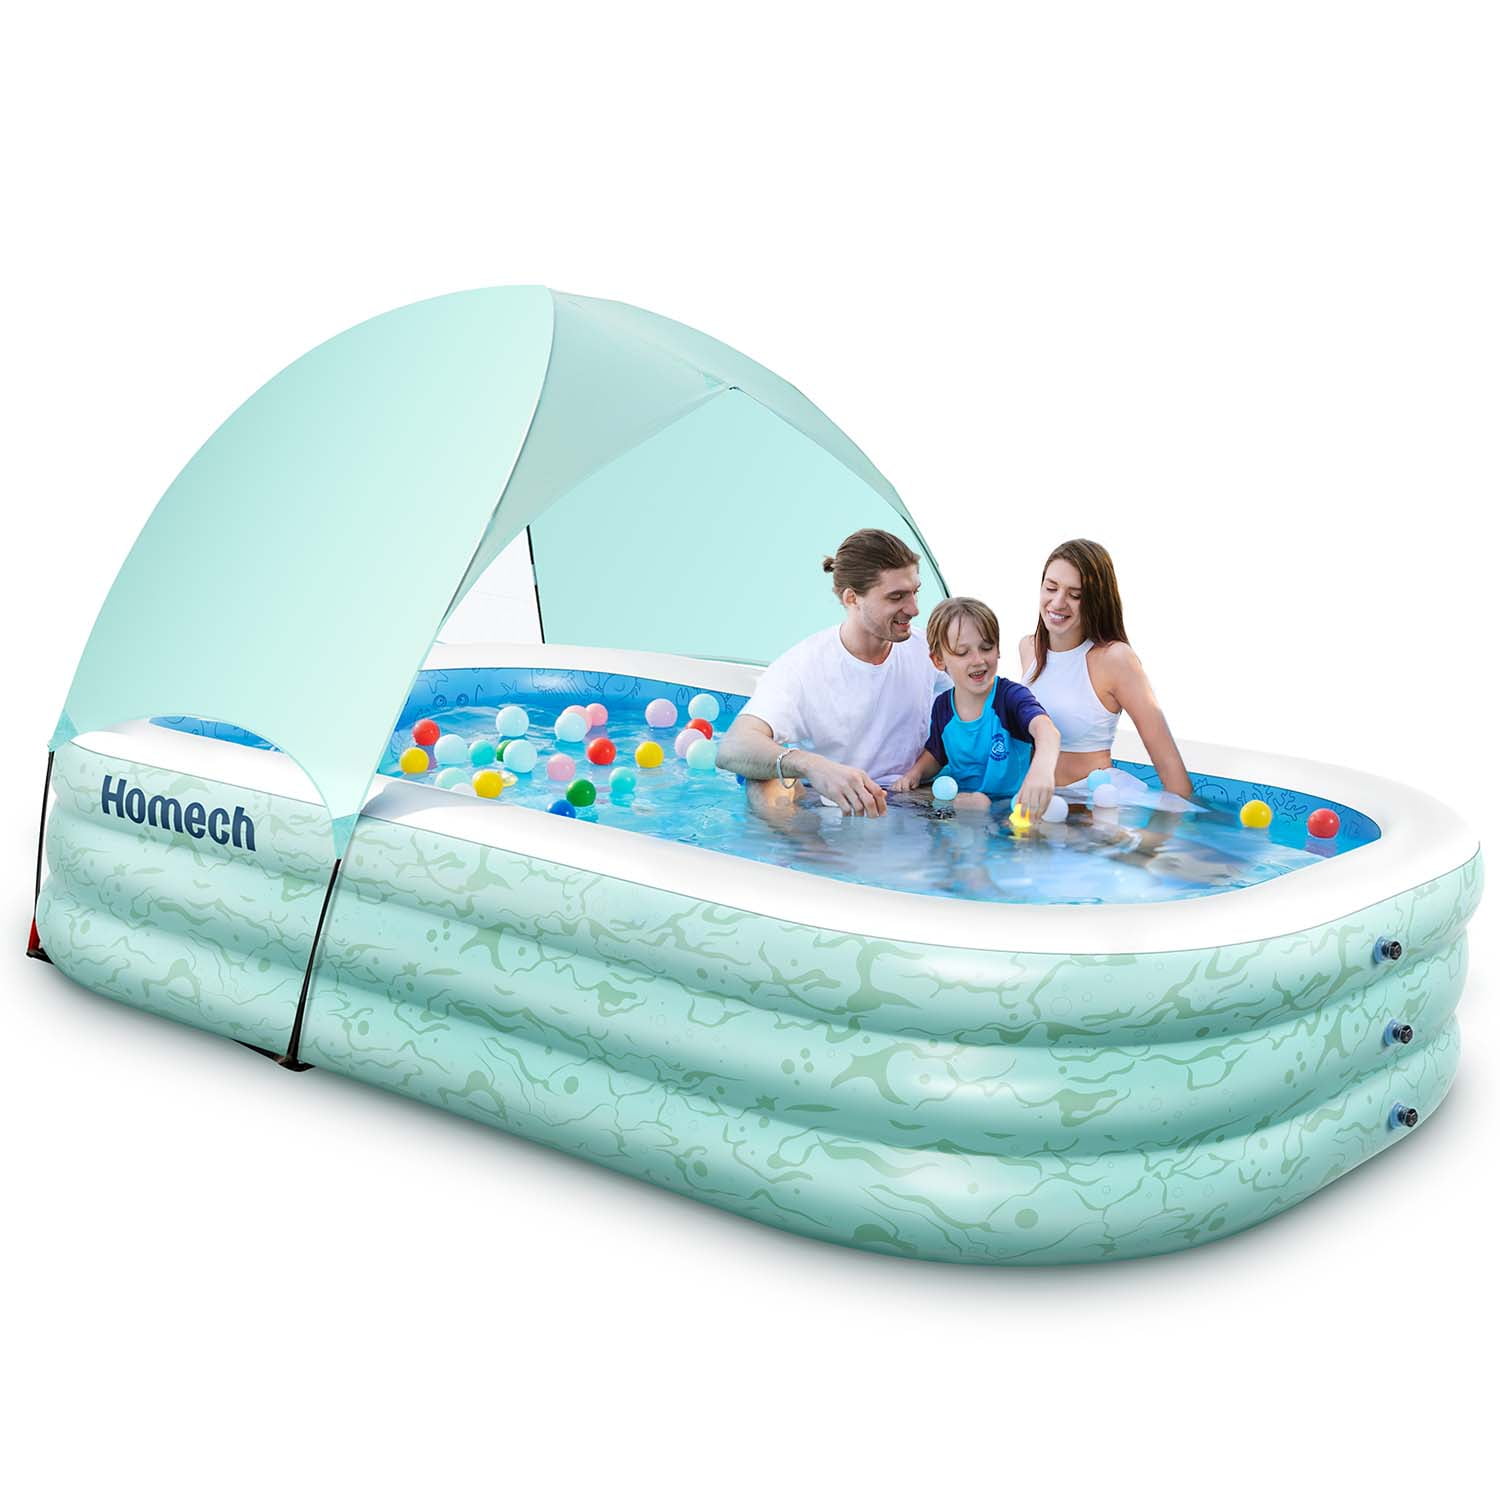 Giant Family Inflatable Swimming Pool 210x150x68cm Full-Sized Blow Up Kiddie Pool with Awning Inflatable Lounge Pool Wireless inflatable Sunshade Swimming Pool 83x59x27in Independent Airbag Pool 